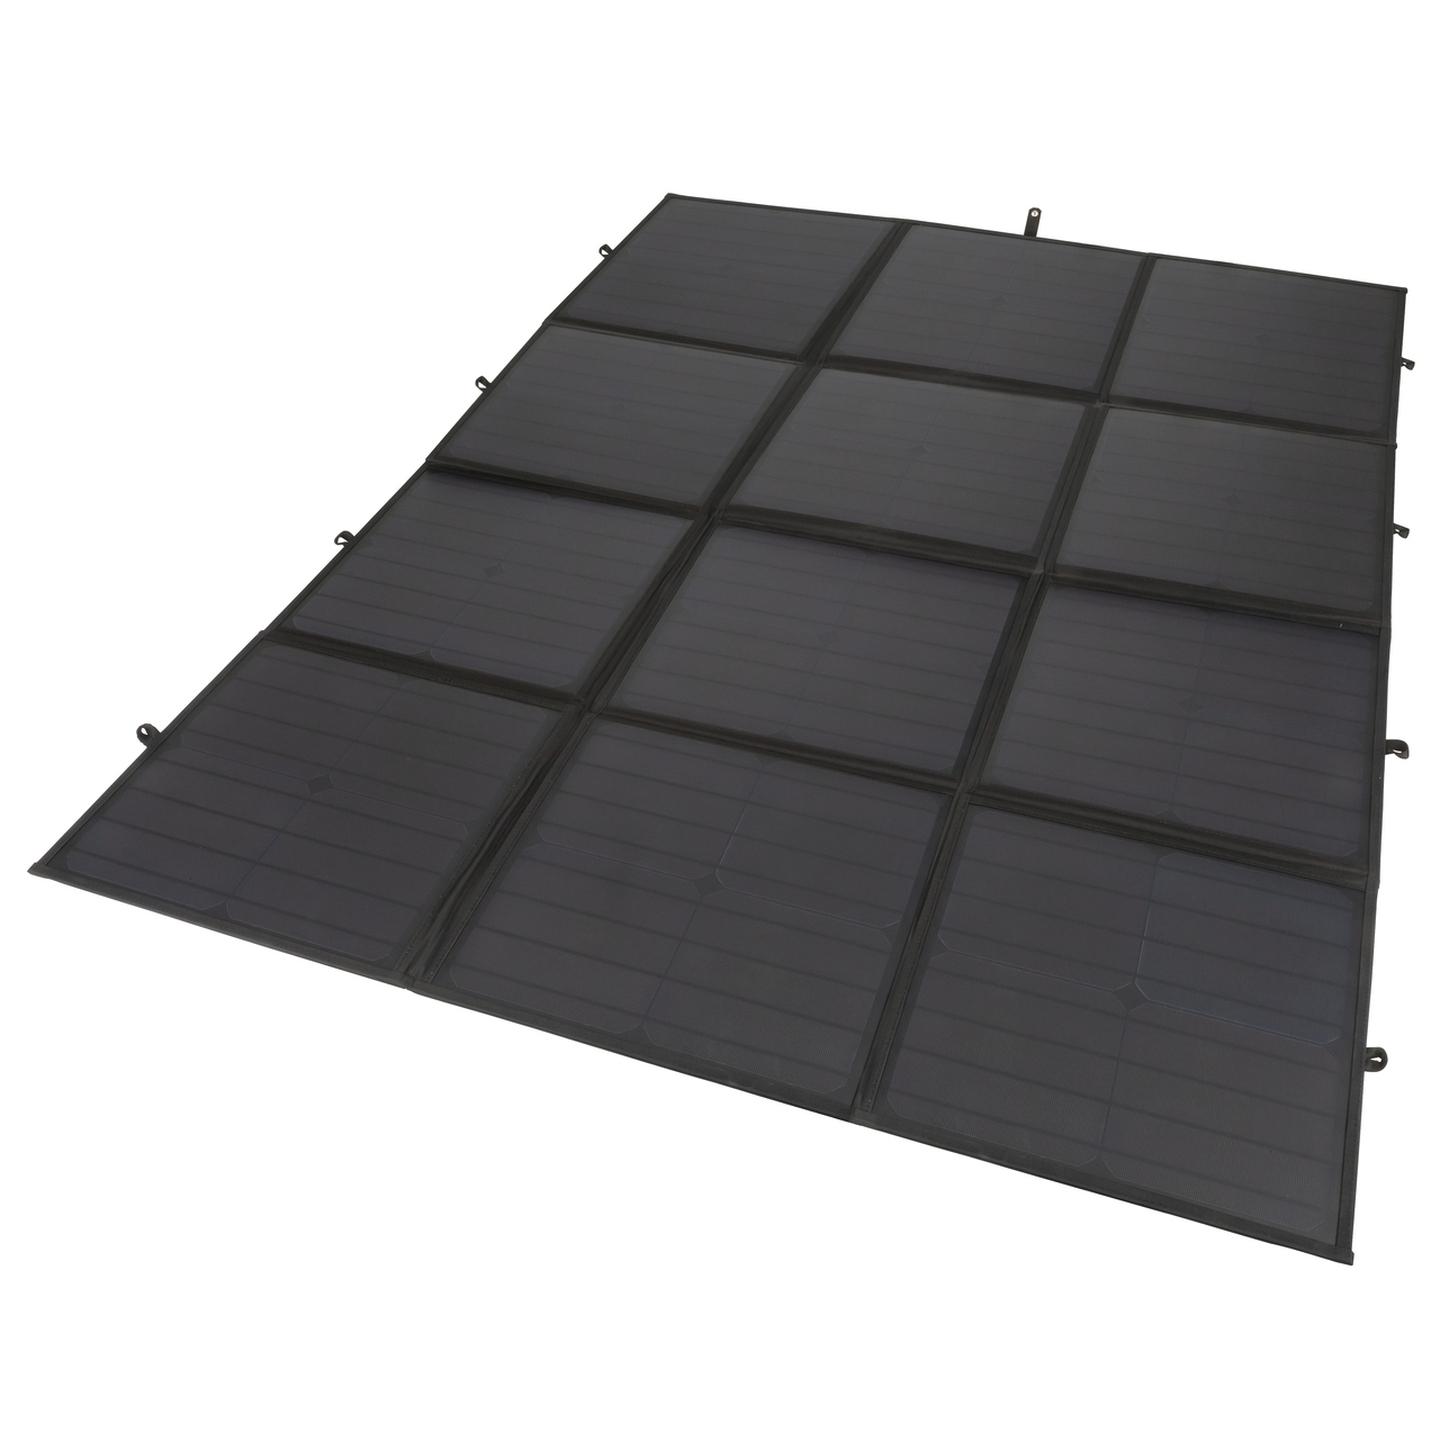 12V 400W Blanket Solar Panel with Accessories